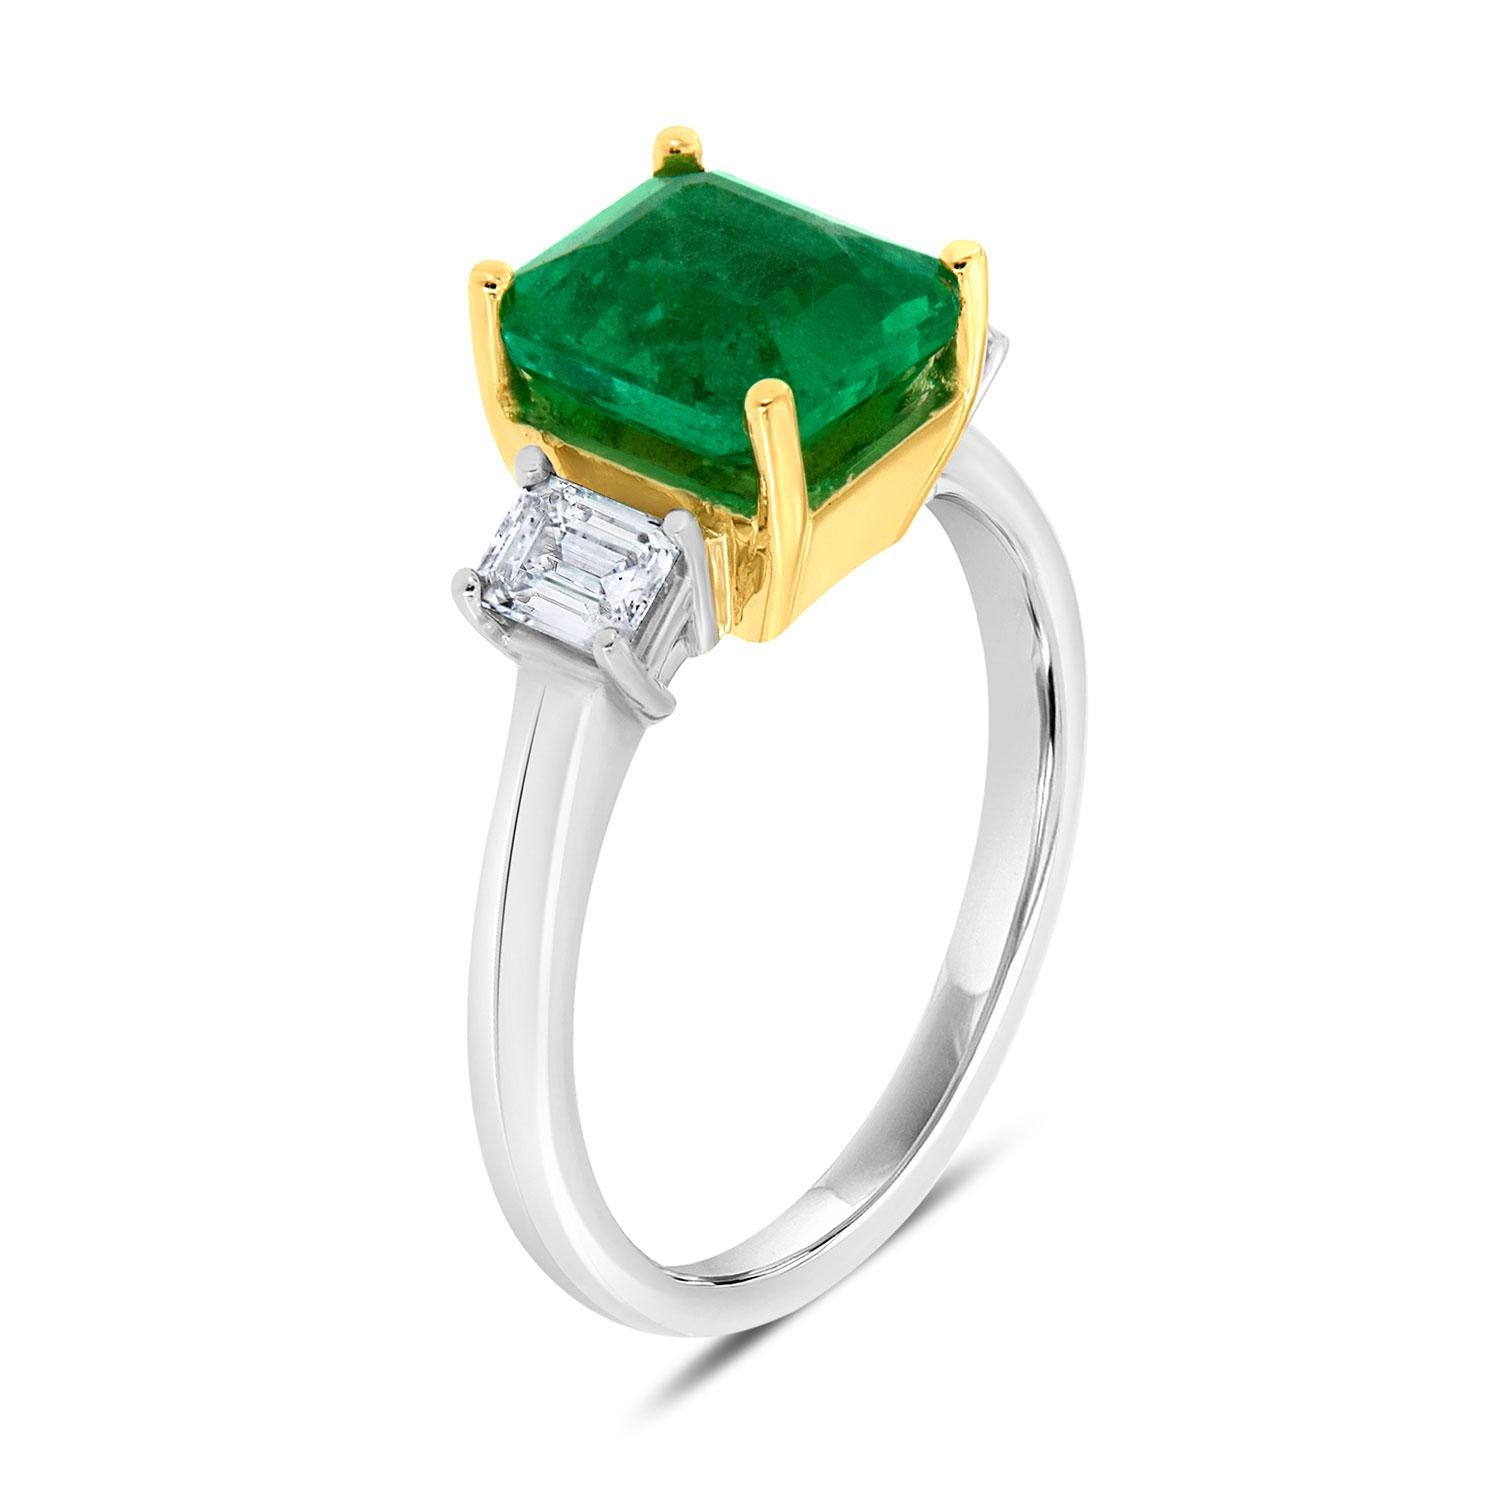 This Classic Three-stone ring features a 2.31 Carat Ethiopian emerald flanked by two perfectly matched emerald-shaped natural diamonds in the total weight of 0.44 carat. Our clients love Ethiopian emerald due to their exceptional luster and color